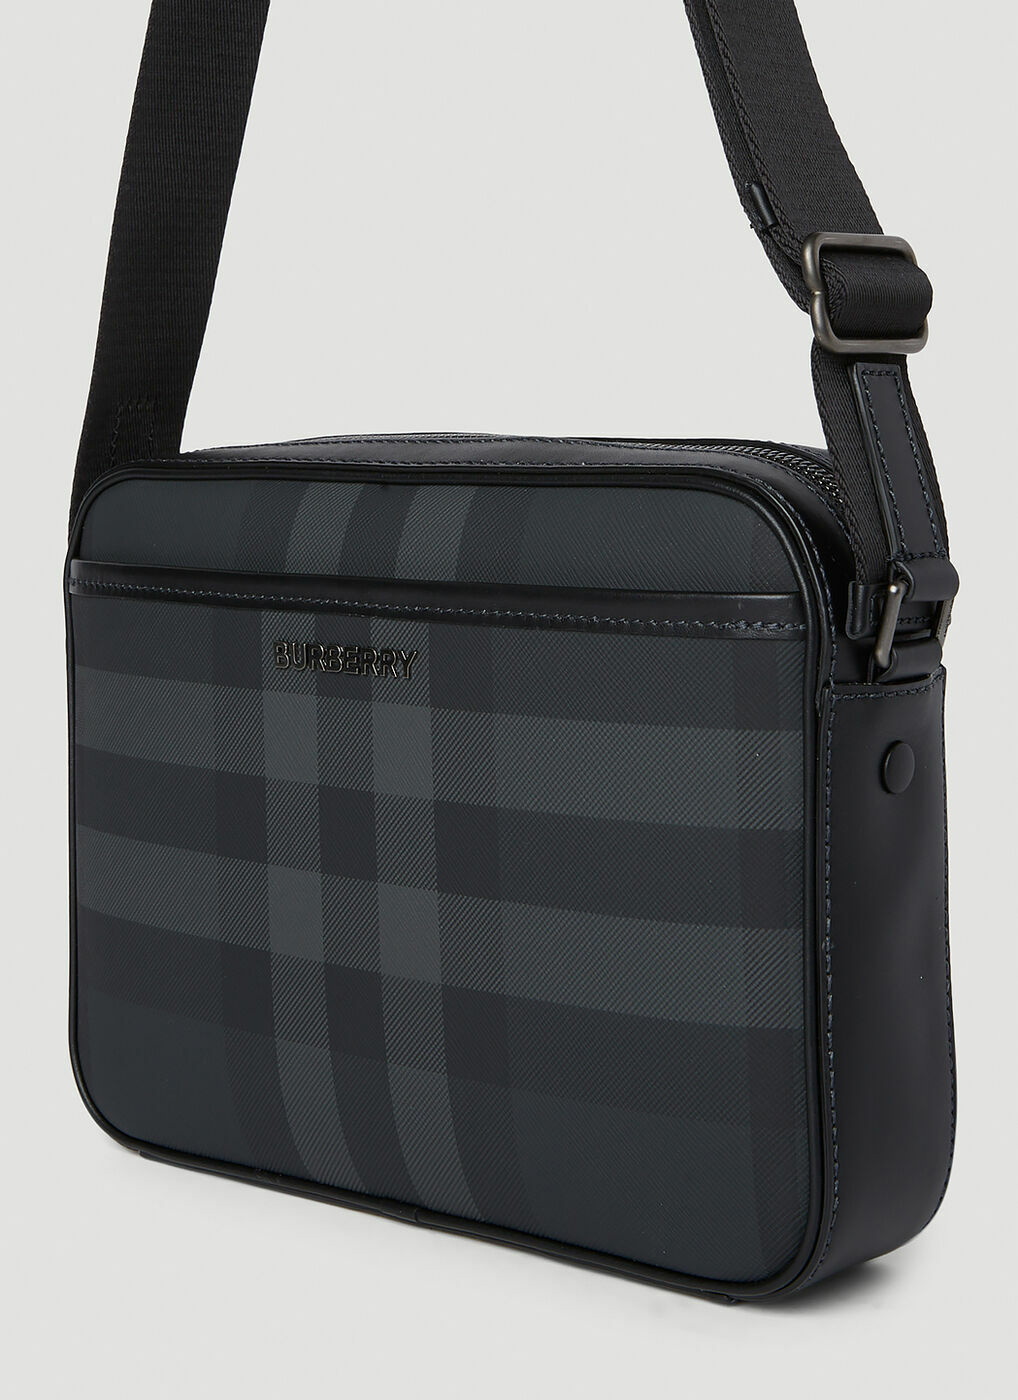 Muswell Bag in Charcoal - Men